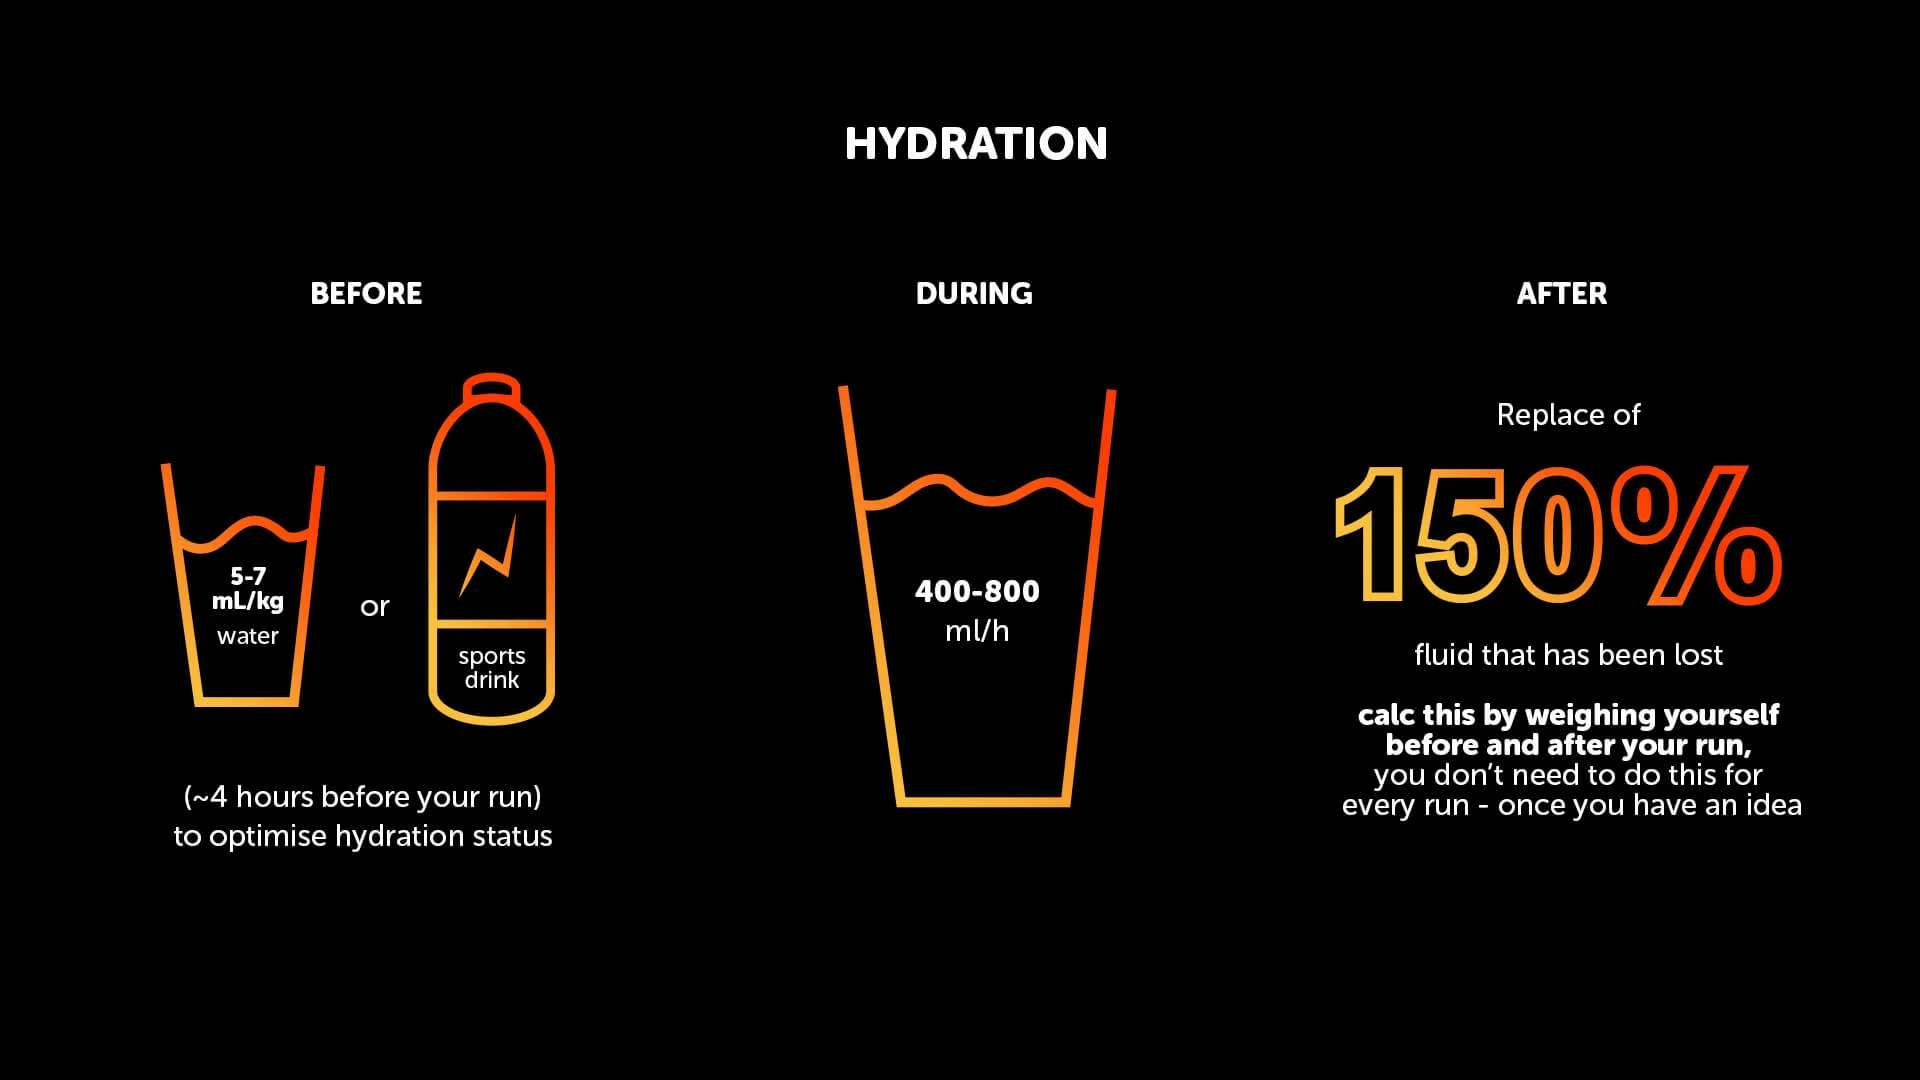 hydration infographic for athletes